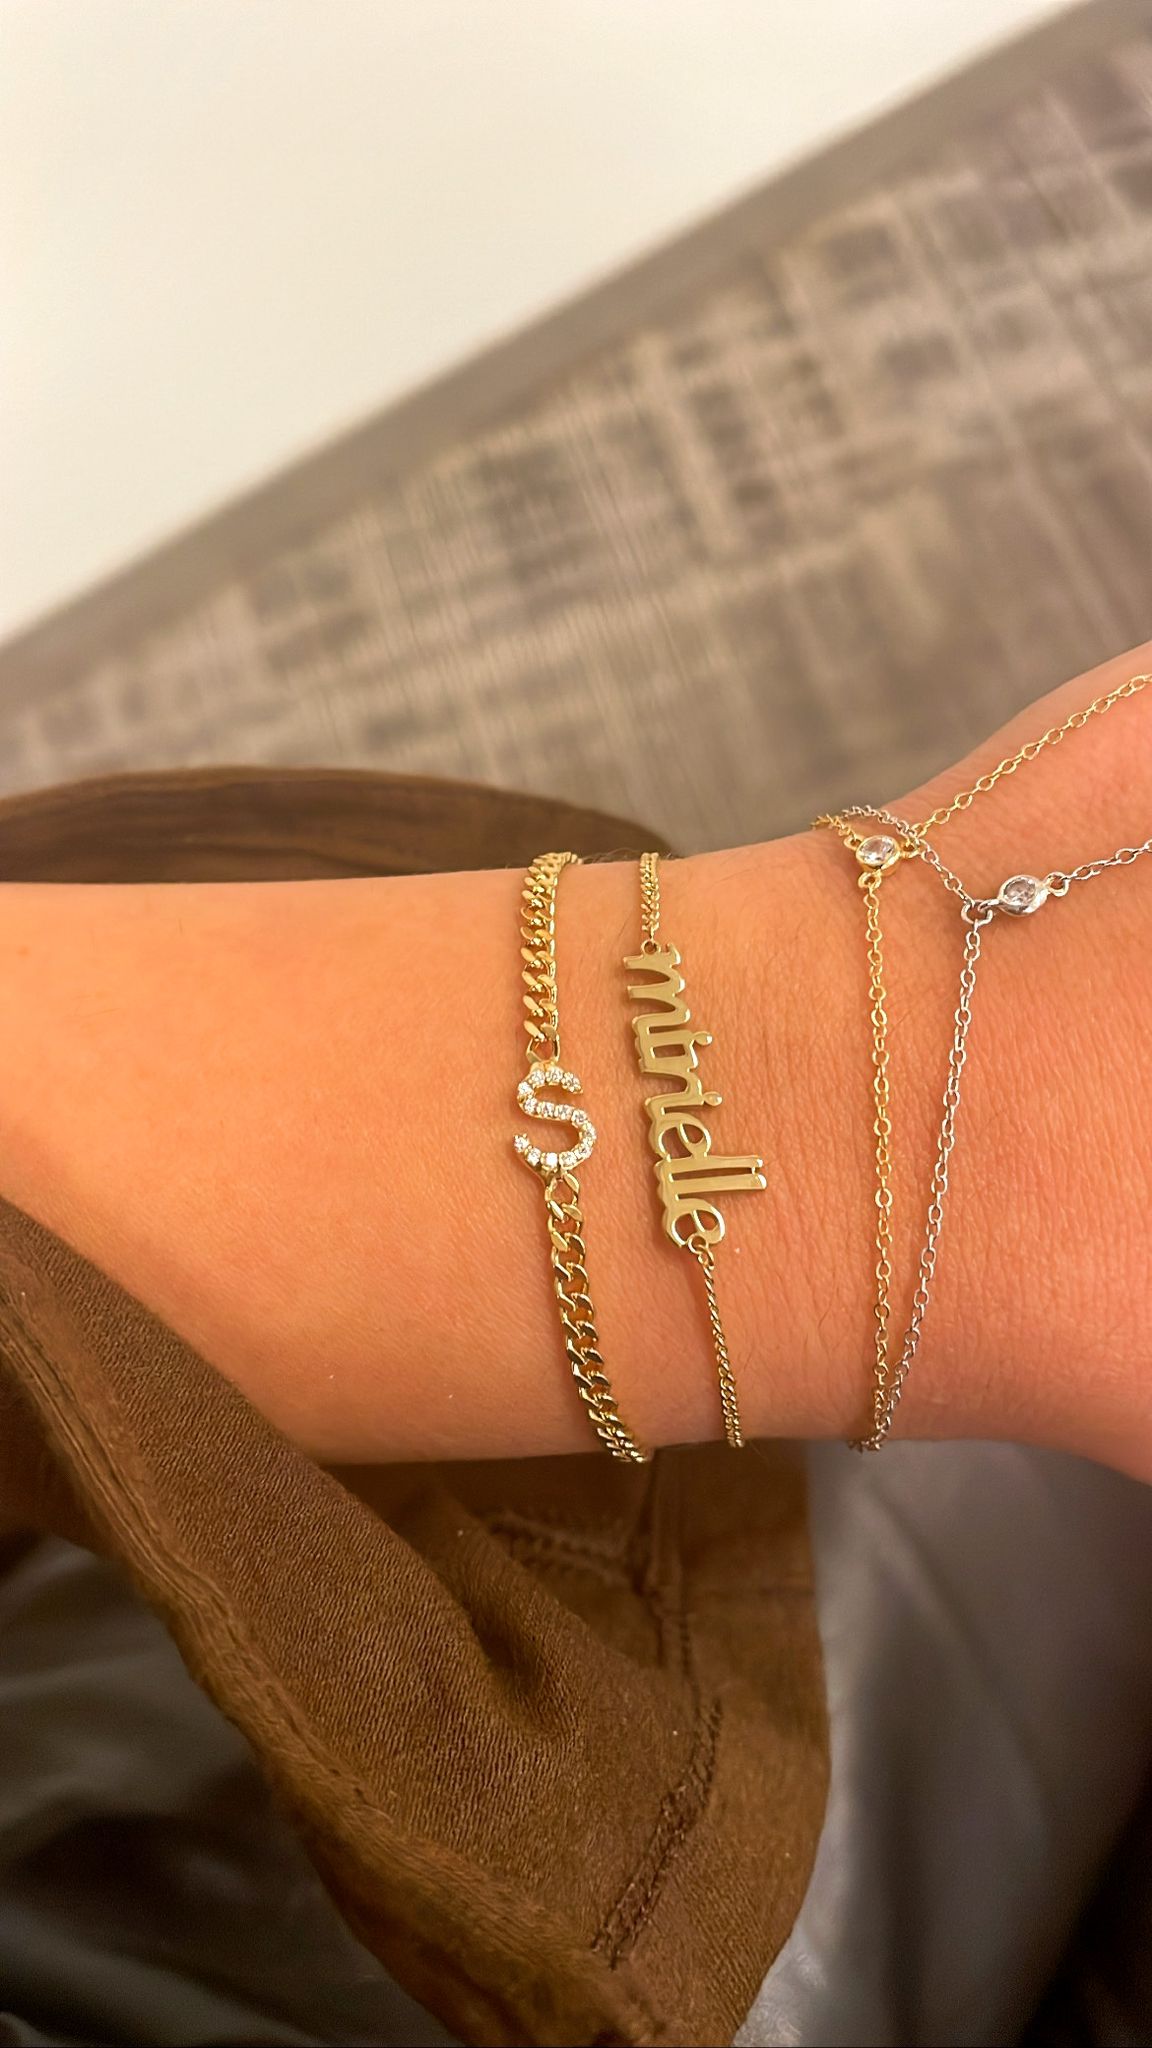 Lowercase Name Bracelet - Retail Therapy Jewelry